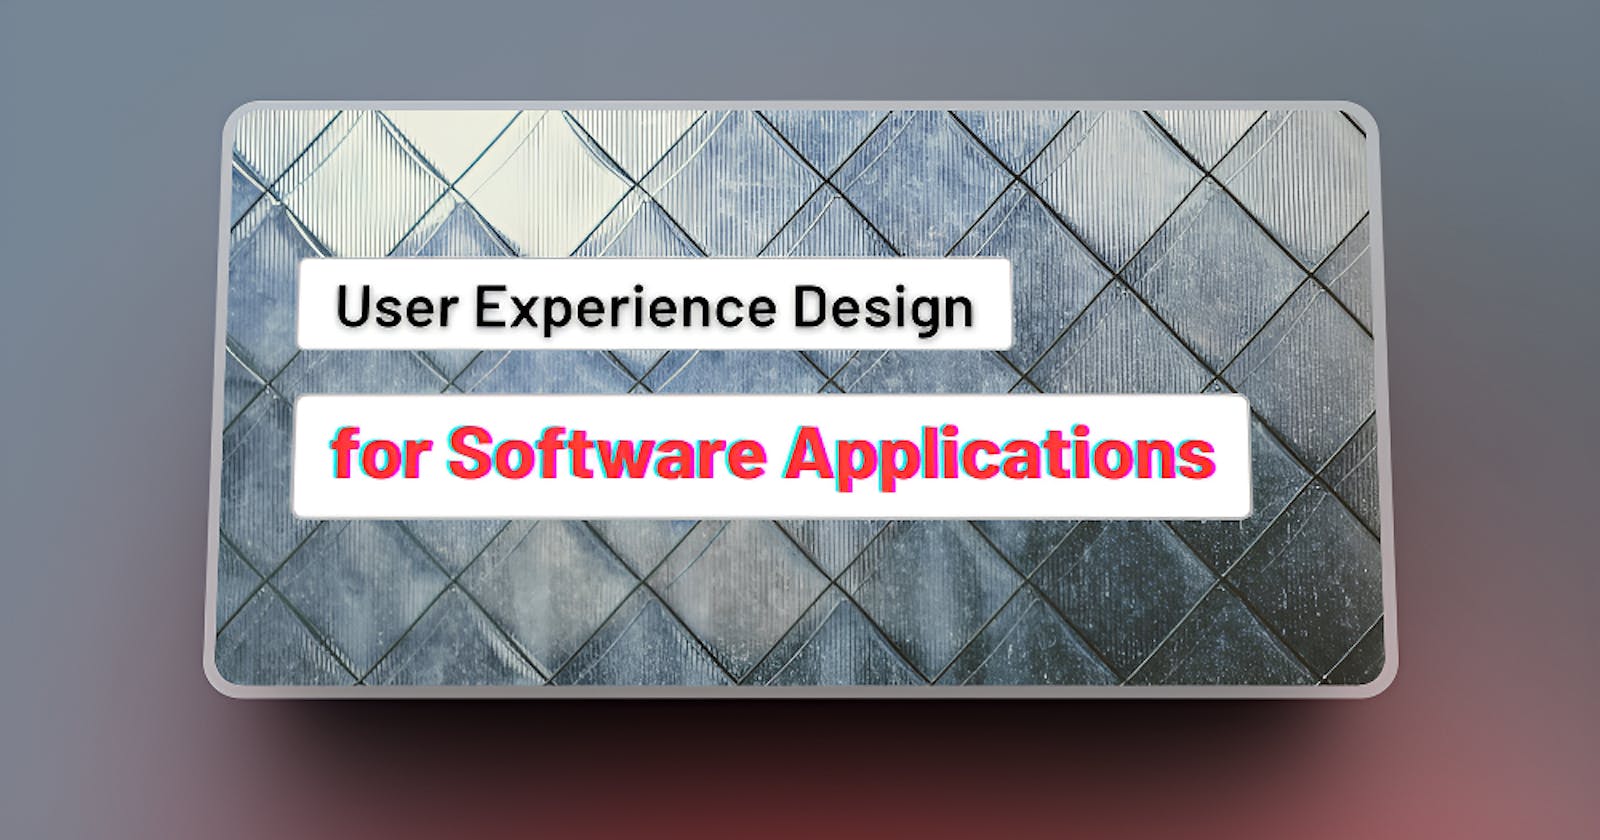 User Experience Design for Software Applications